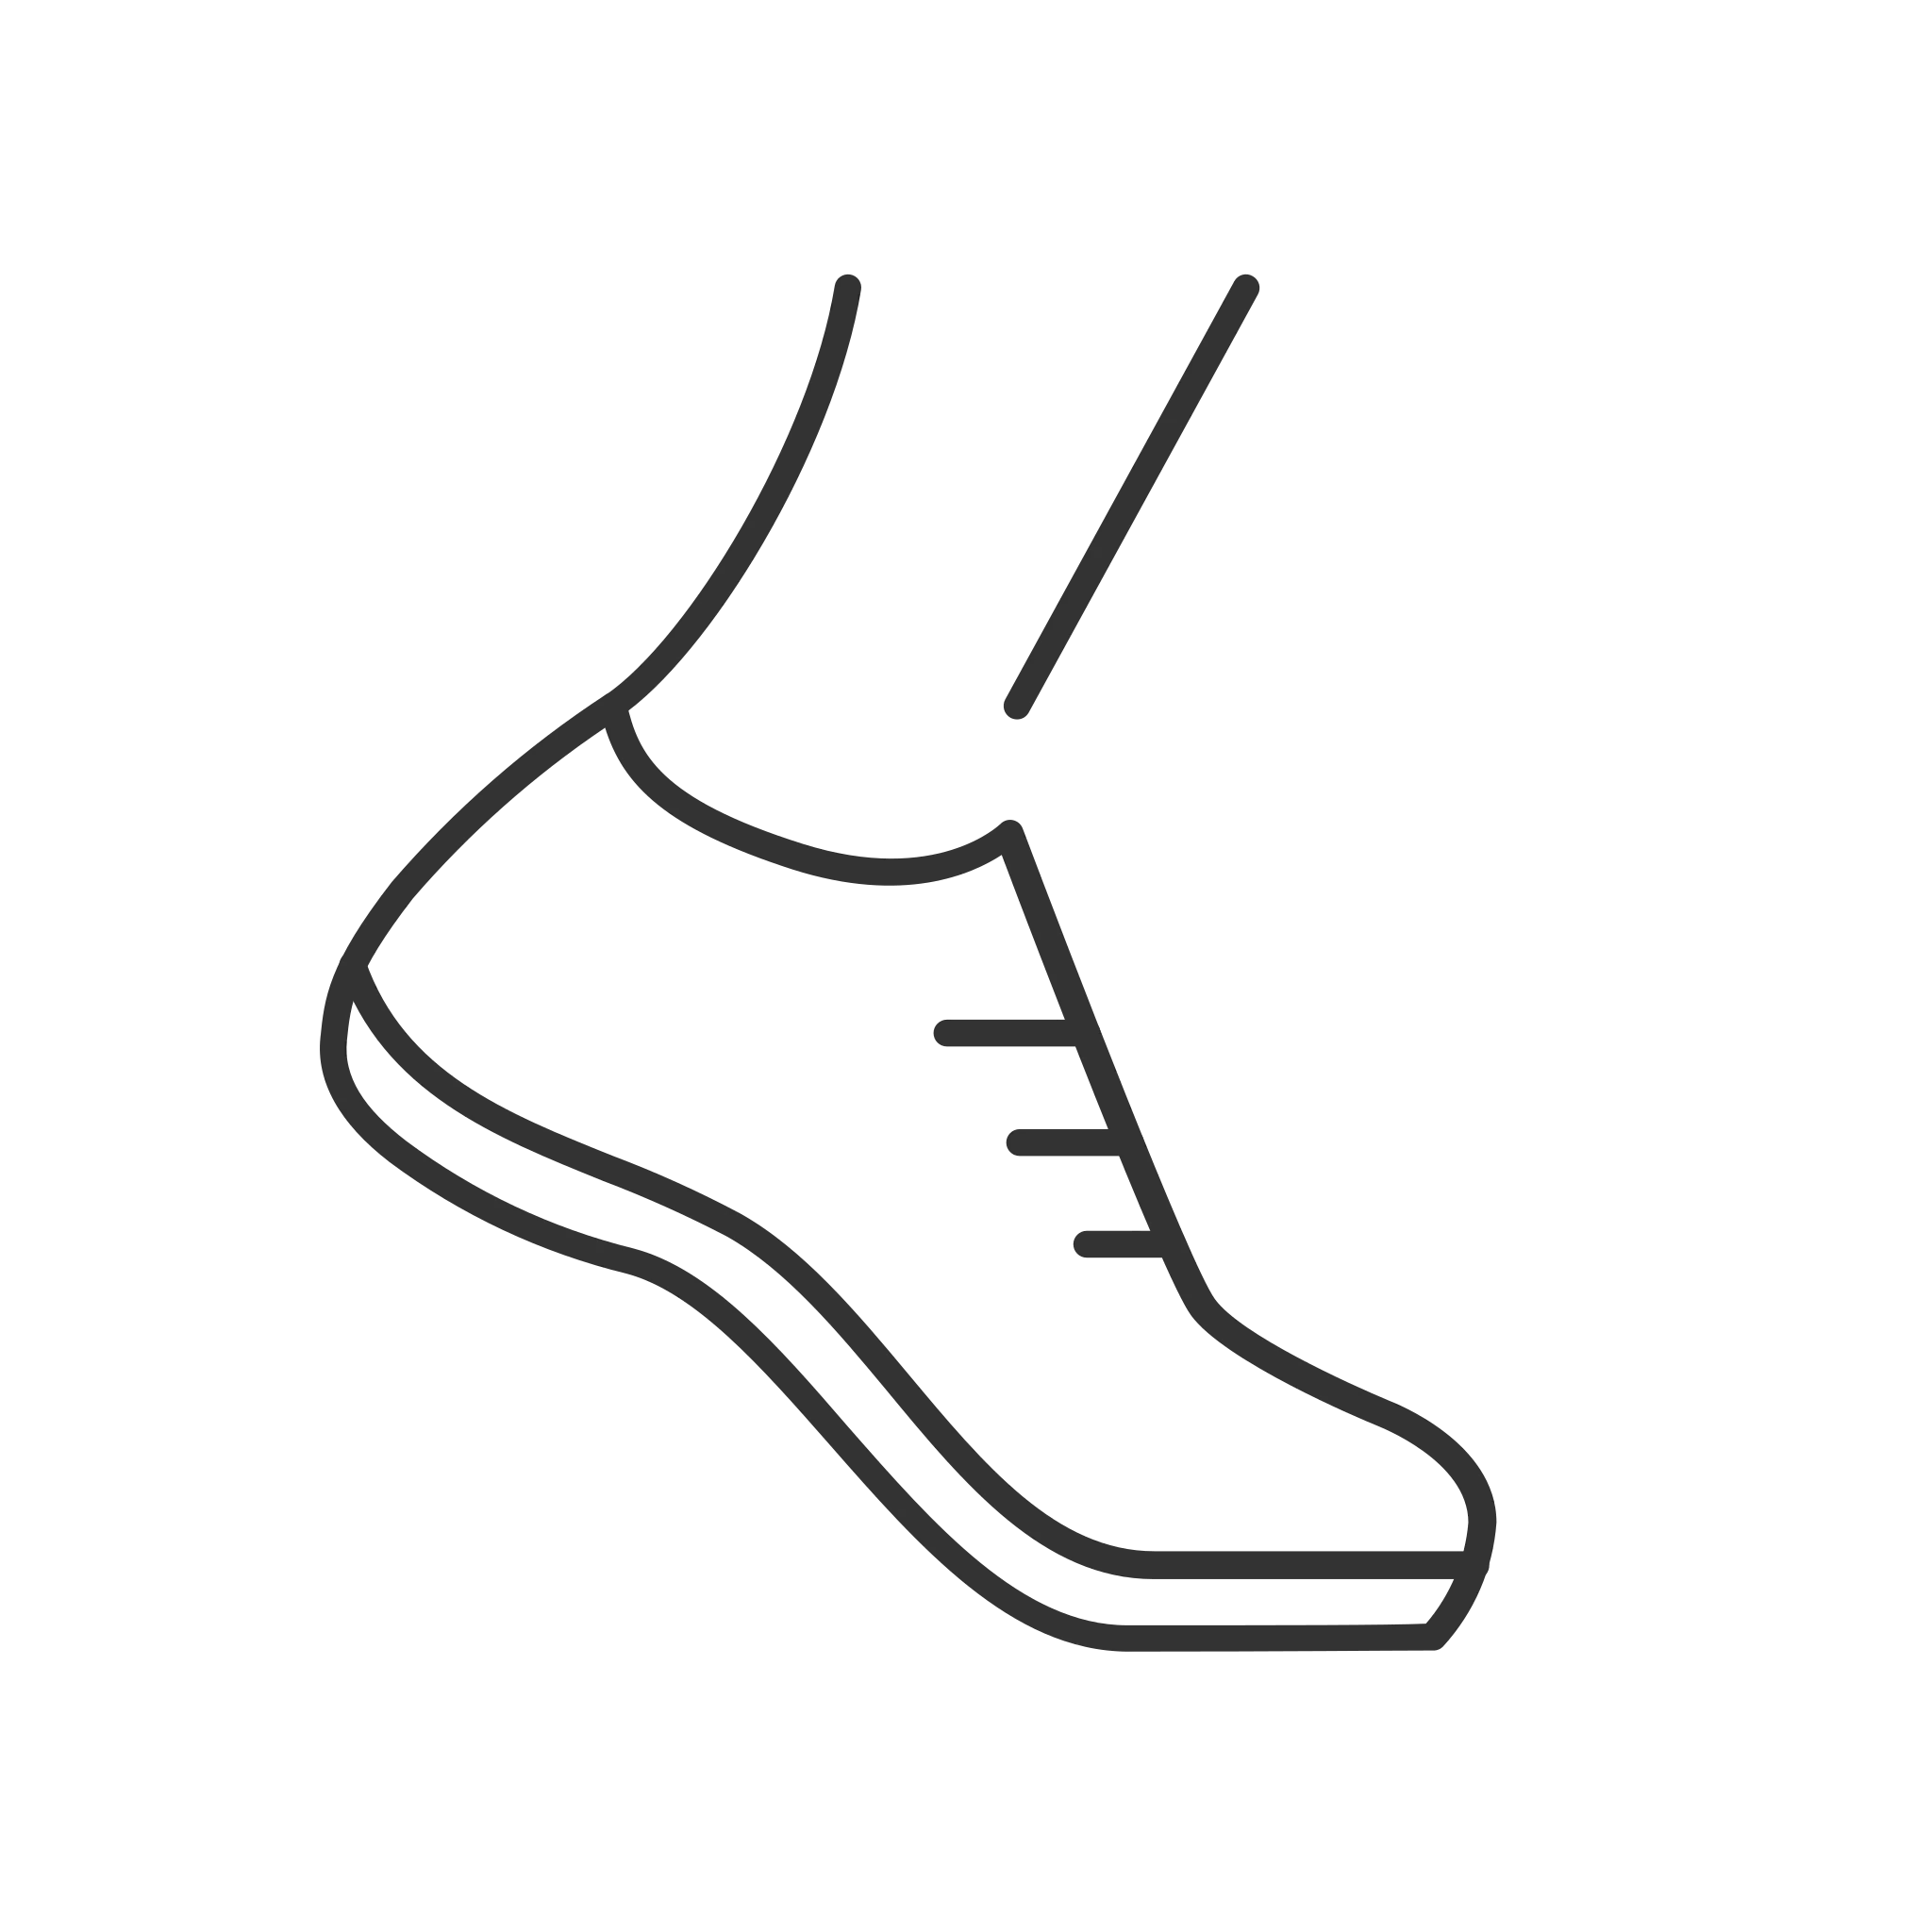 icon of a foot with running shoe on